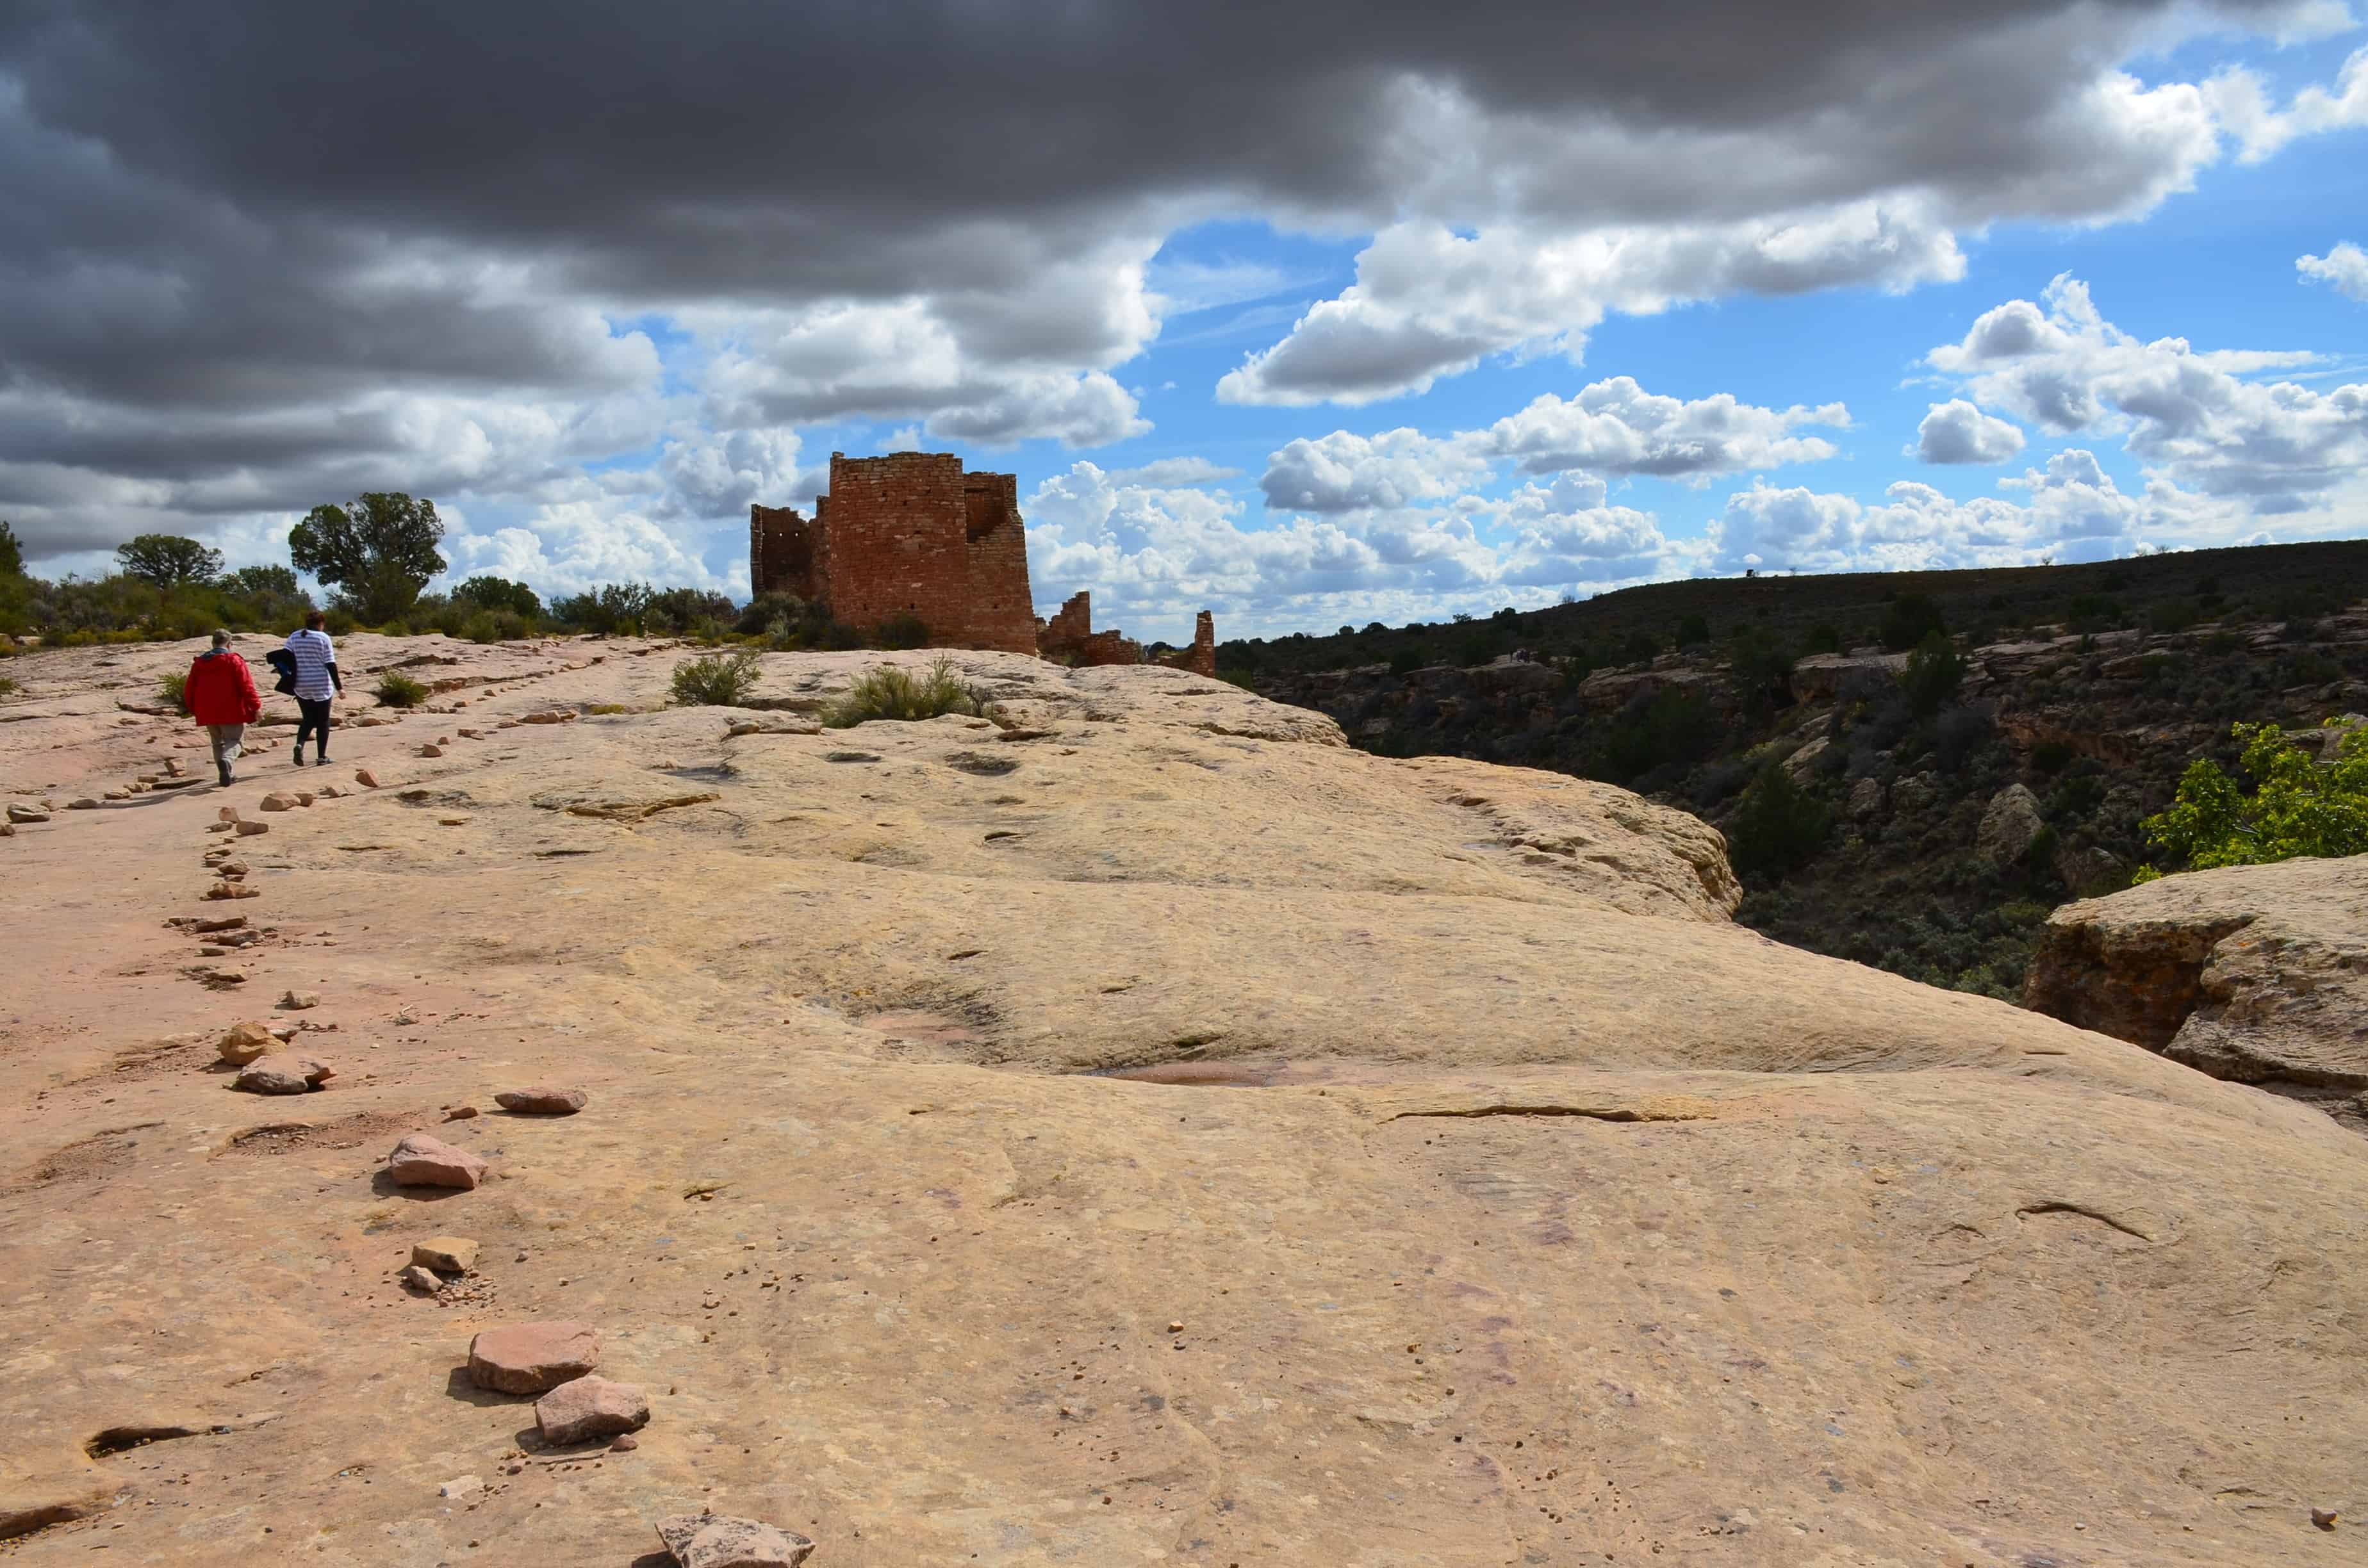 Walking towards Hovenweep Castle at Hovenweep National Monument in Utah